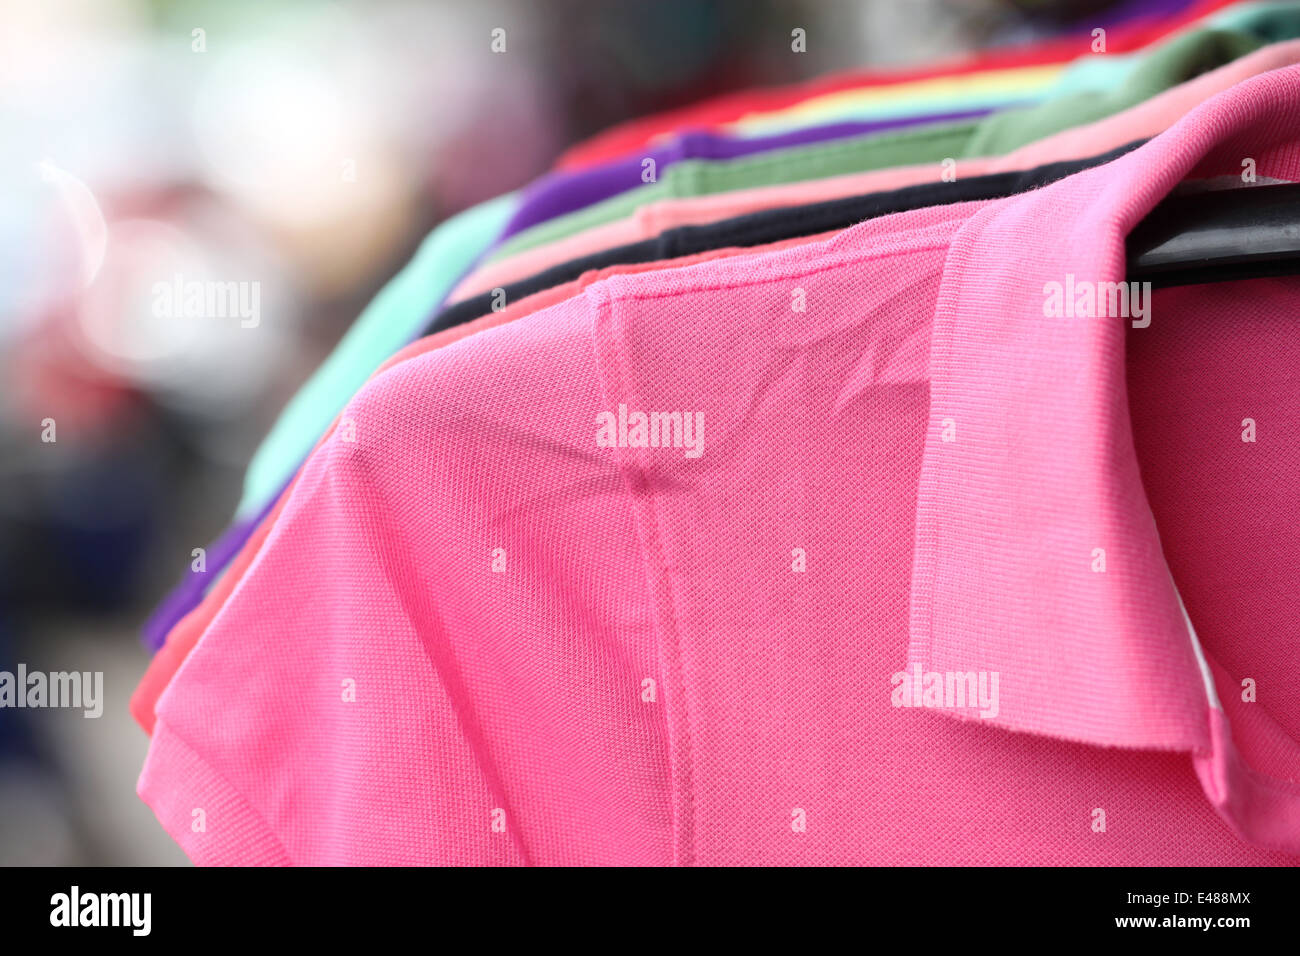 Pink shirt on a hanger in shop. Stock Photo